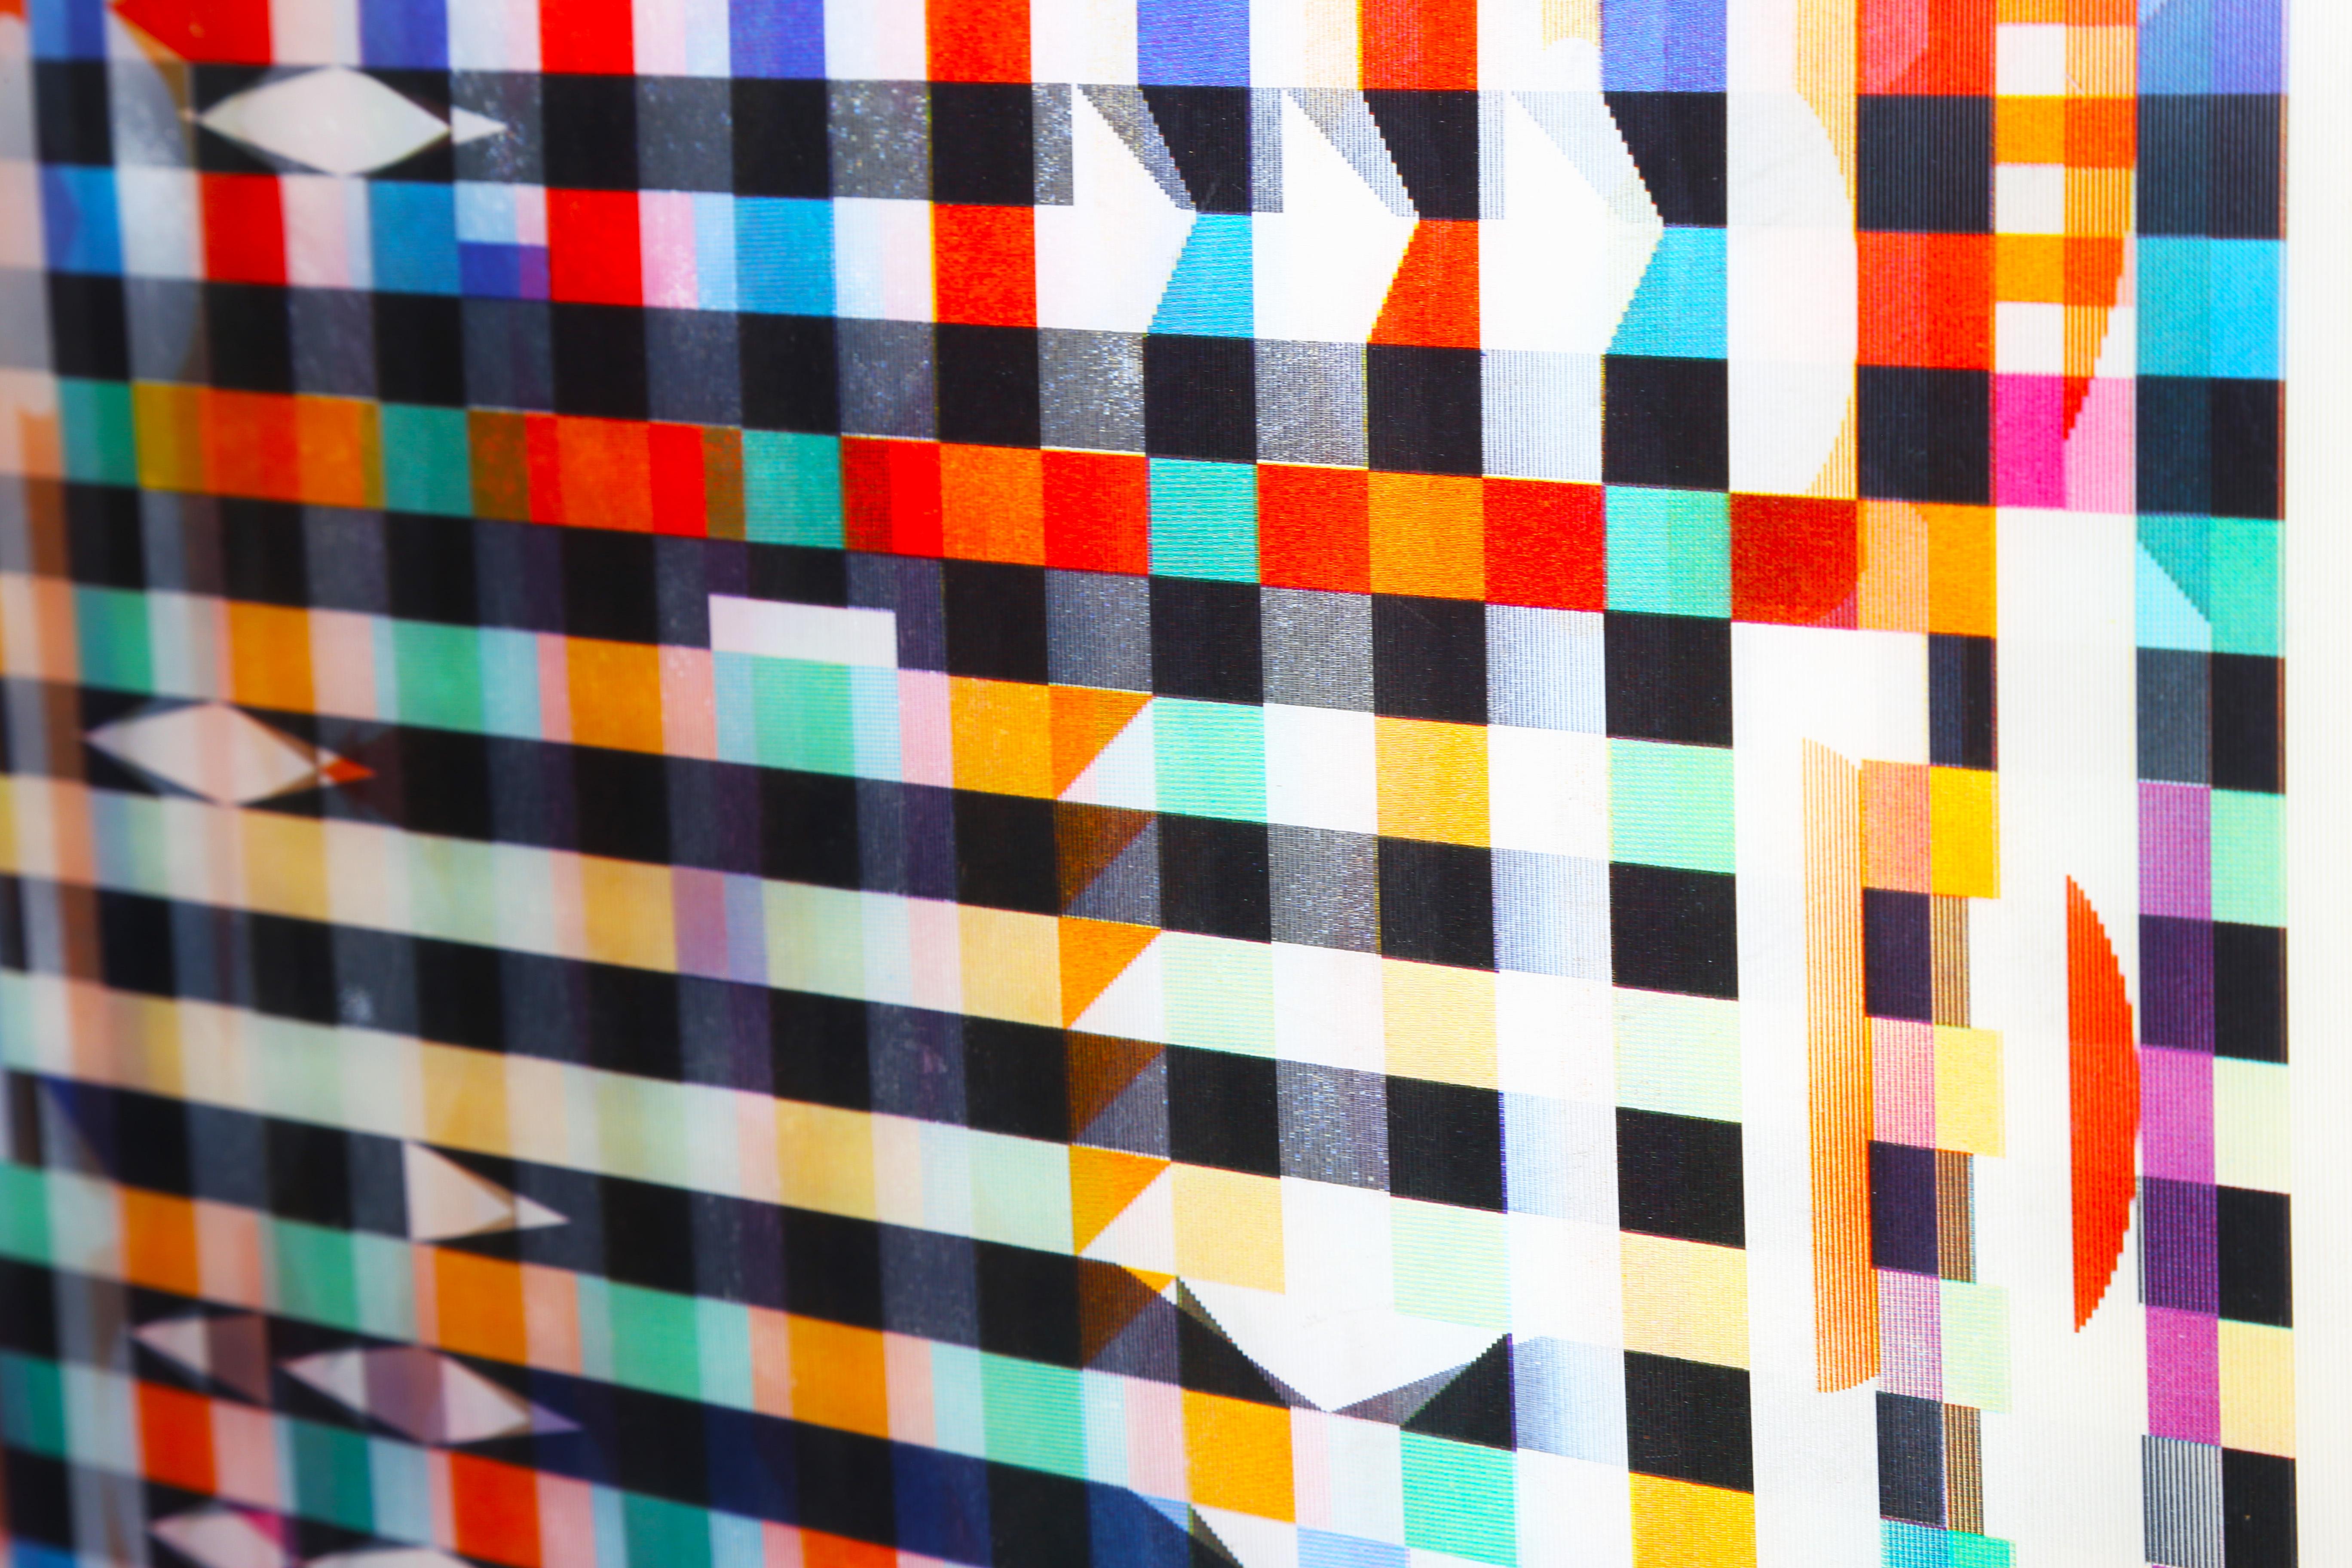 The Agamograph is Agam’s unique contribution to the OP Art movement. The object is a print behind a lenticular surface that fools the eye to show movement and three-dimensional depth. The work is hand-signed and numbered in marker by the artist.